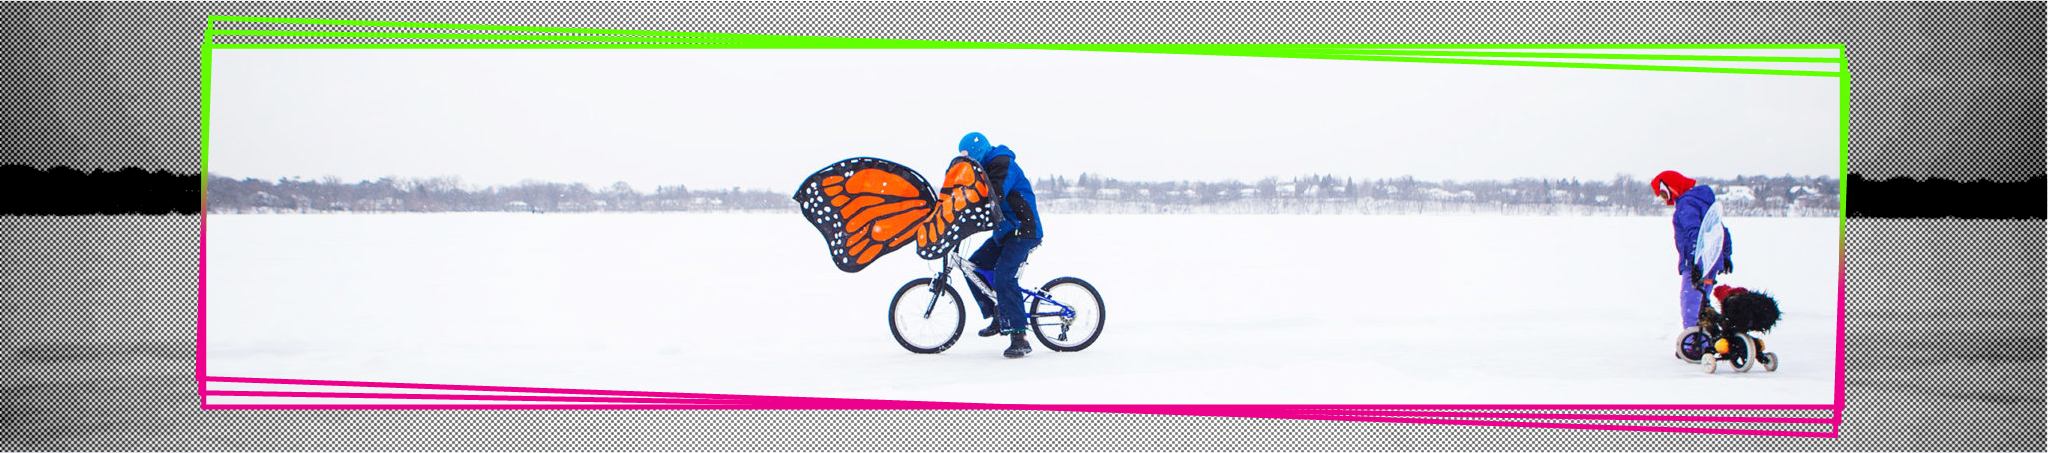 A person rides a bike on the ice. the bike has wings that look like a monarch butterfly.